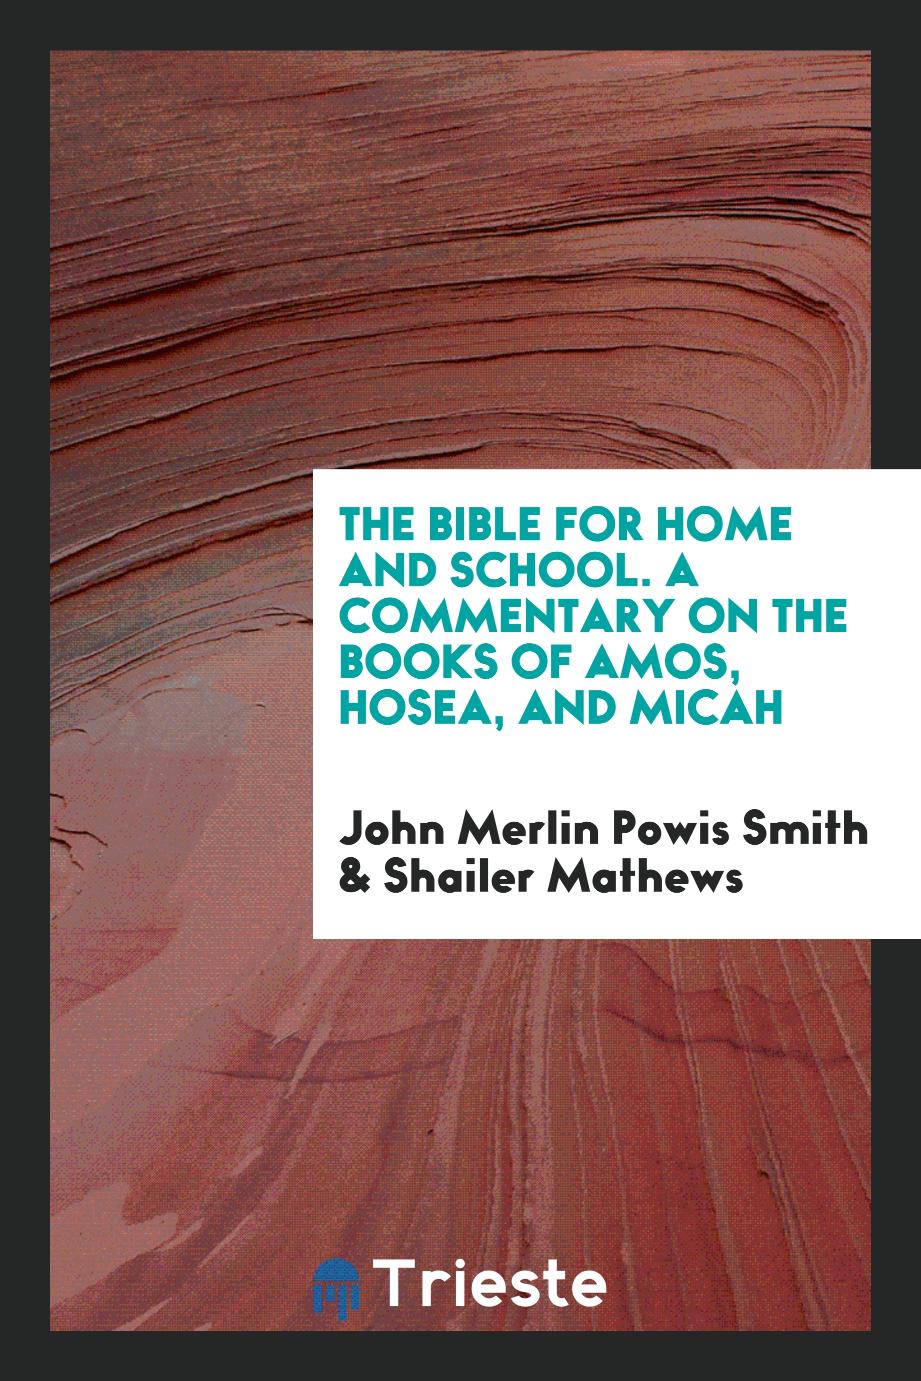 The Bible for Home and School. A Commentary on the Books of Amos, Hosea, and Micah